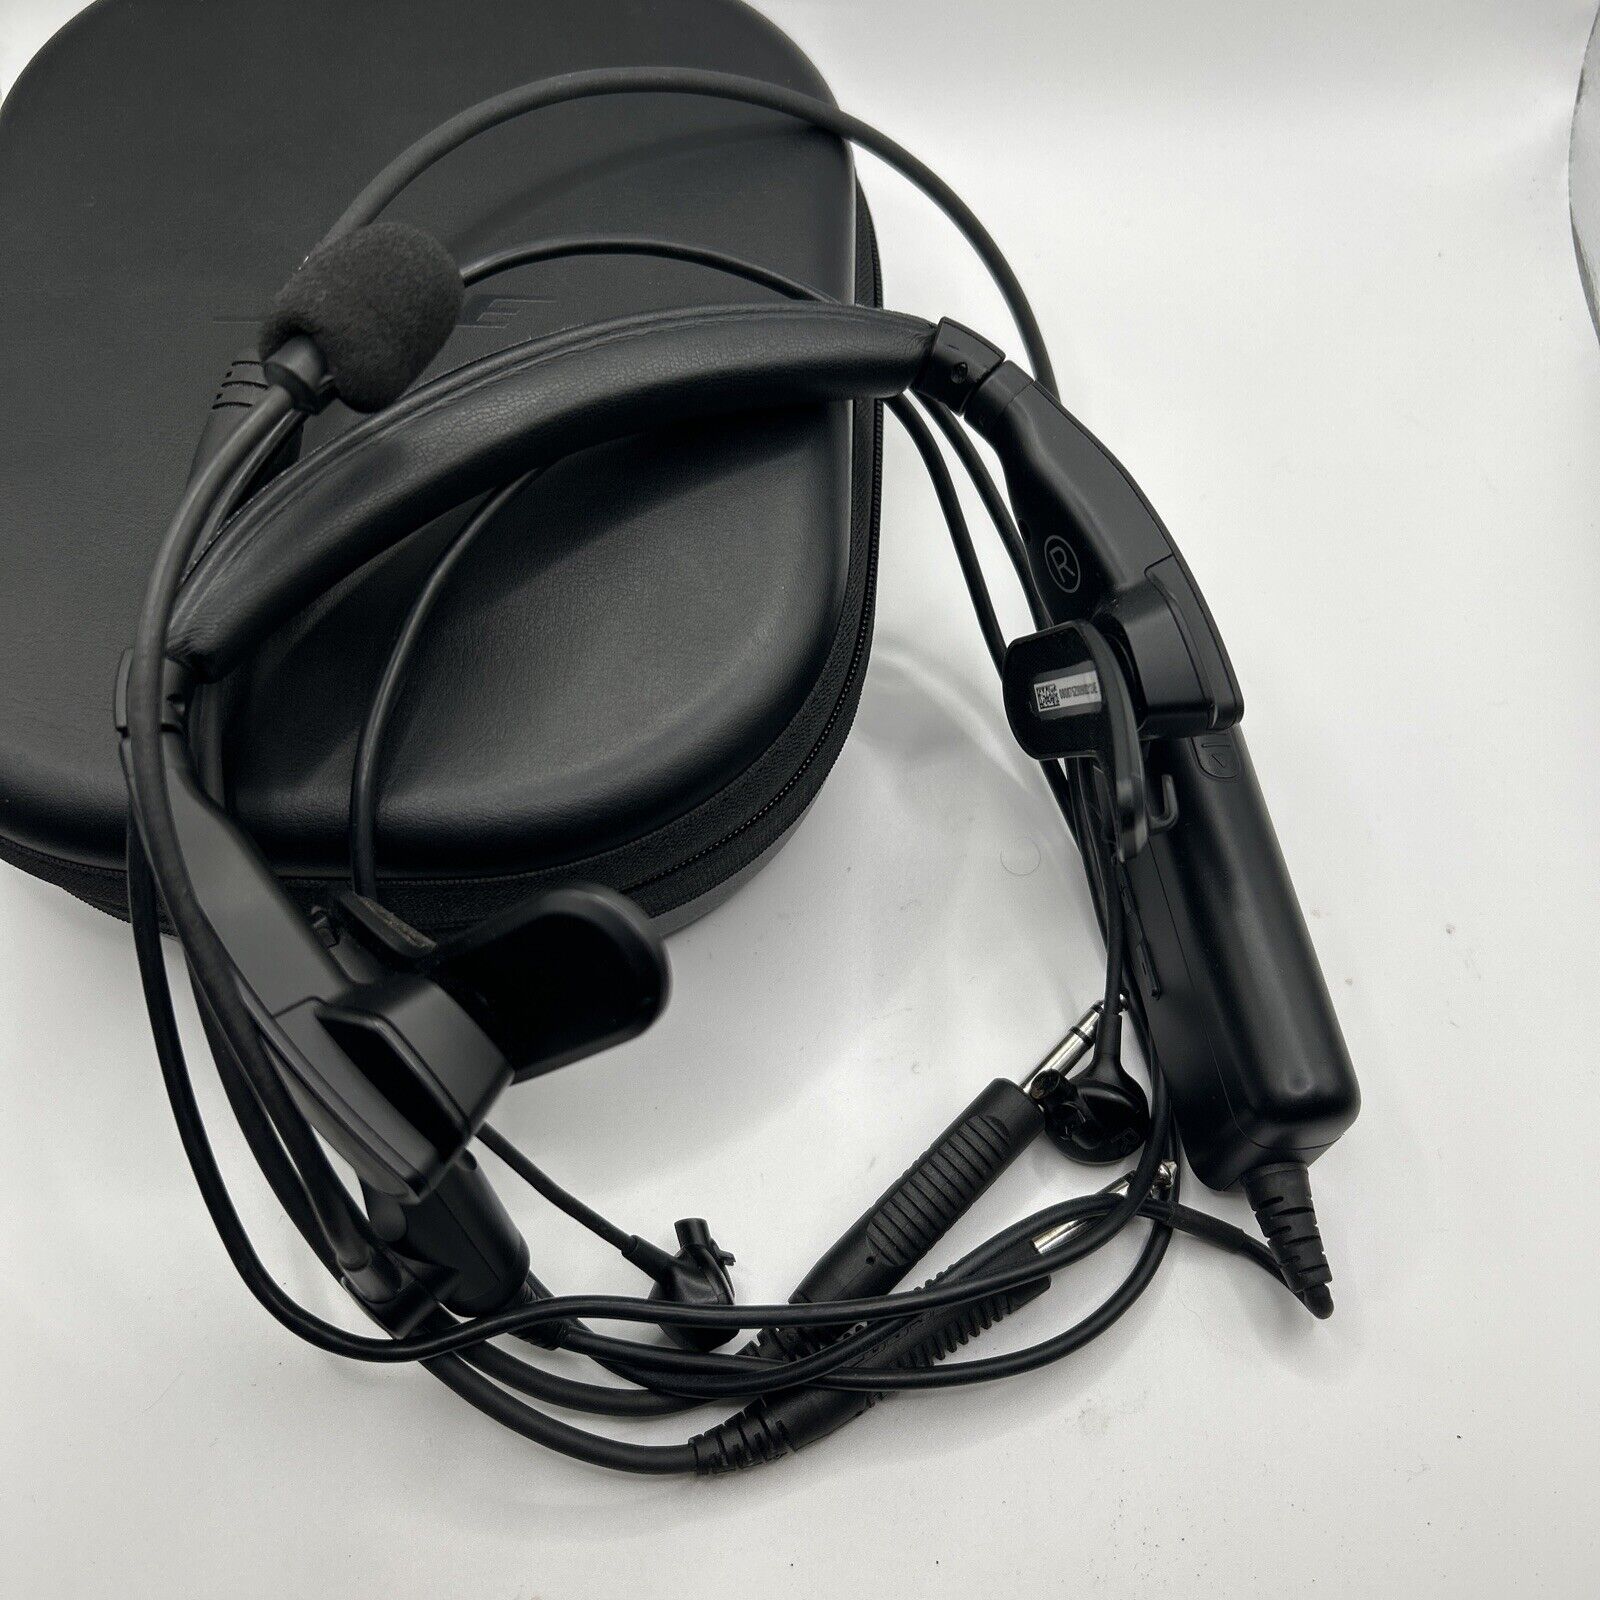 Bose ProFlight Aviation In-Ear Headset Case and New Ear Pieces